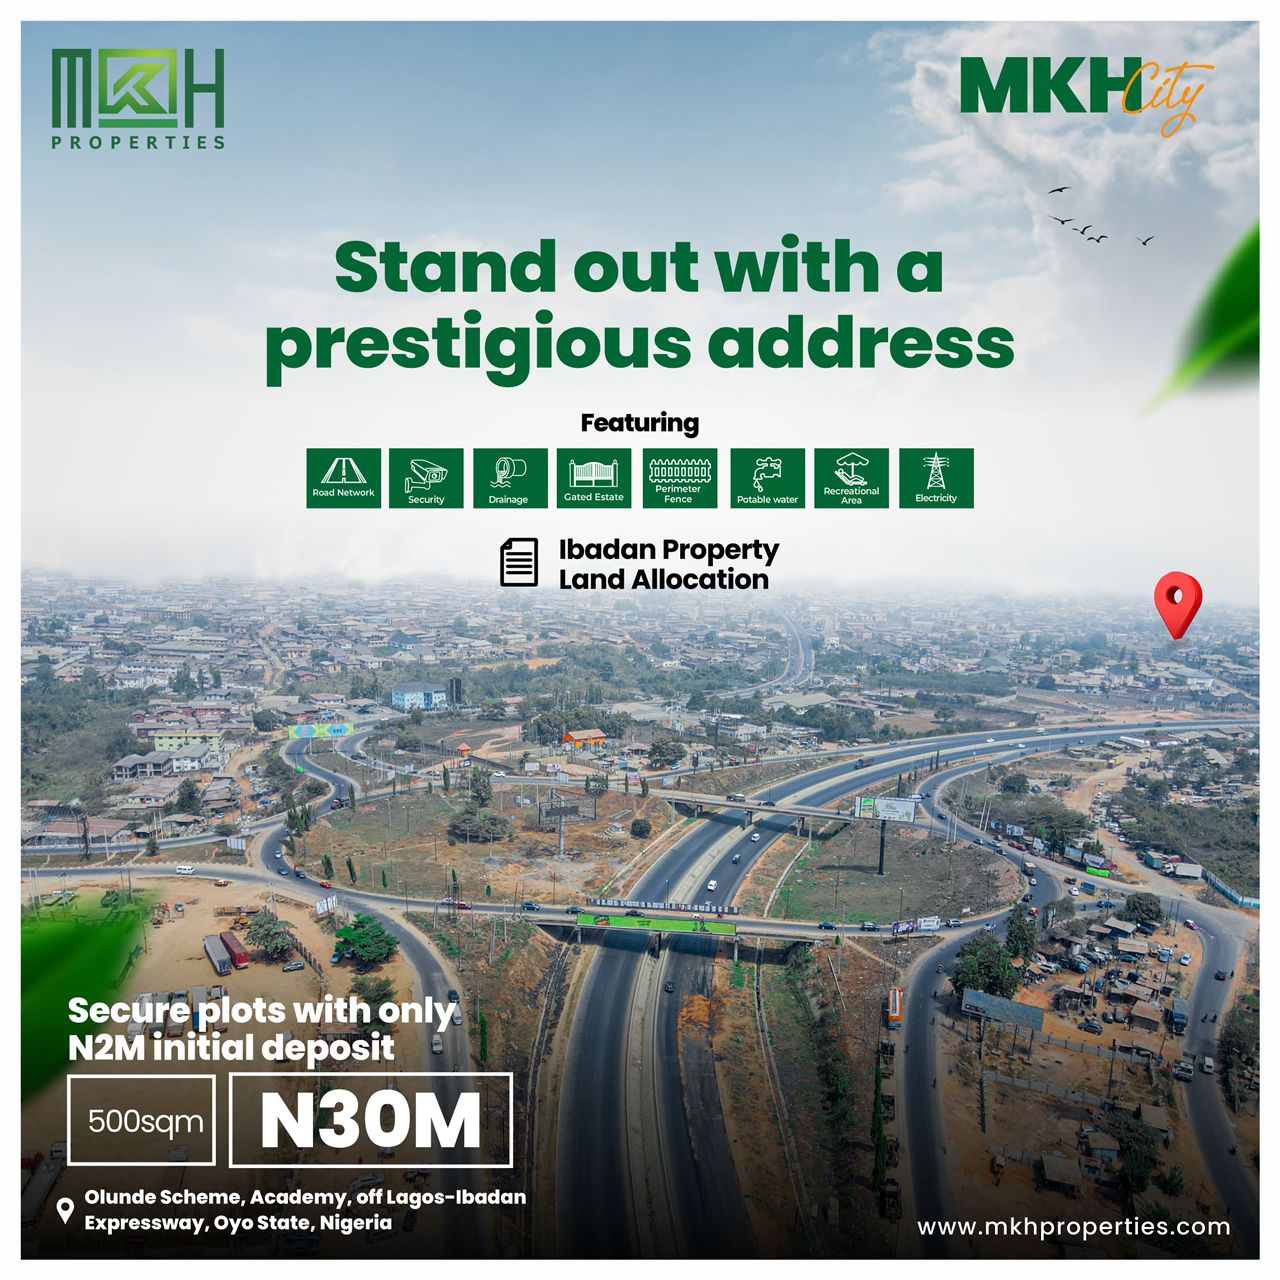 MKH City is an avant-garde residential estate, standing tall as a symbol of modern living and an unparalleled investment opportunity.